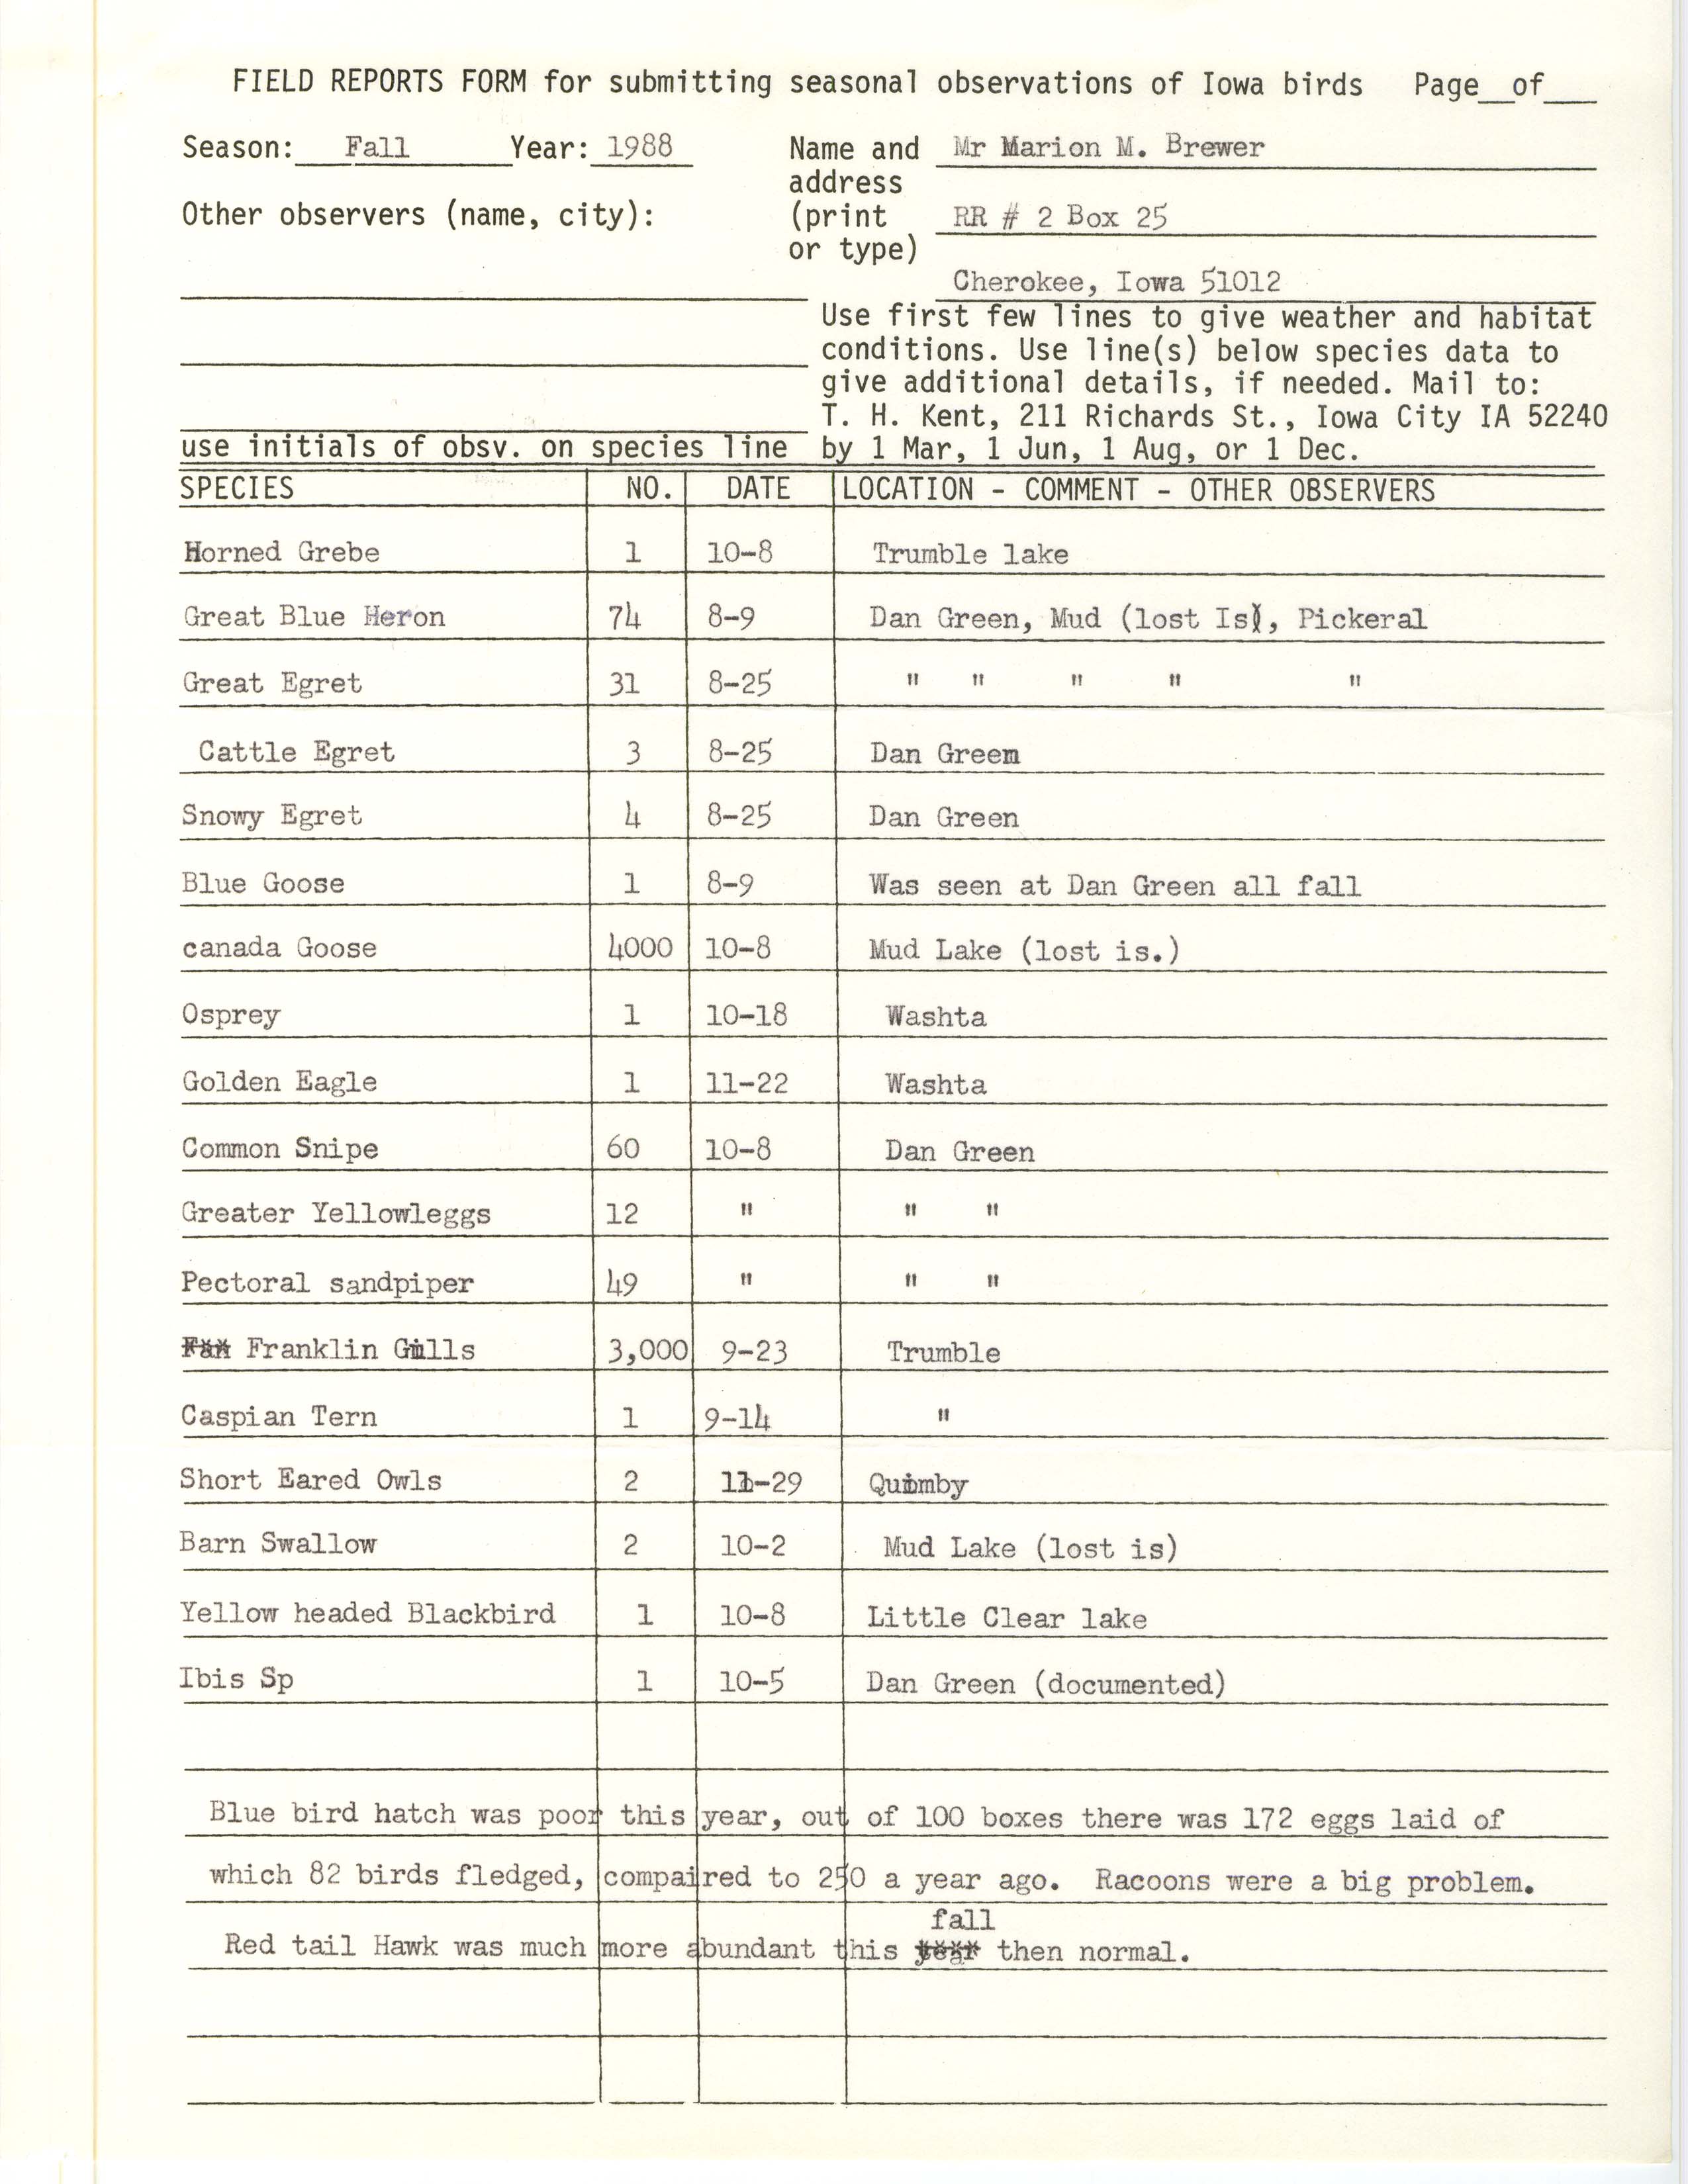 Field reports form for submitting seasonal observations of Iowa birds, Marion M. Brewer, fall 1988